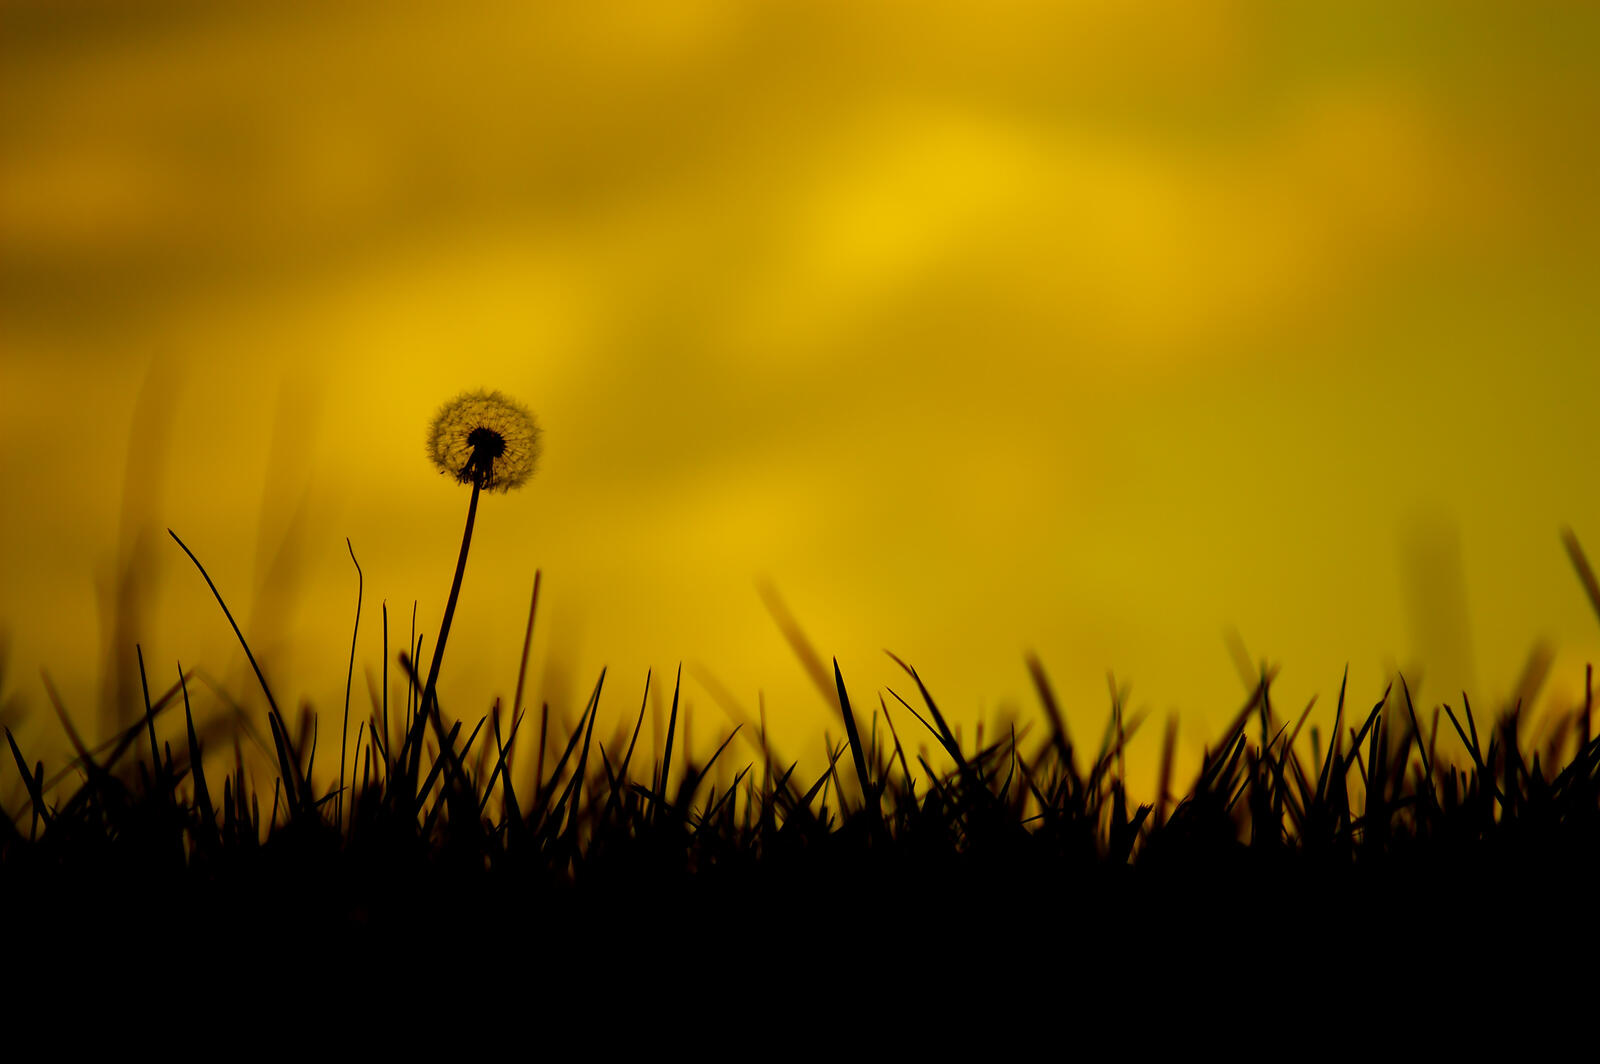 Free photo Silhouette of a dandelion growing on green grass